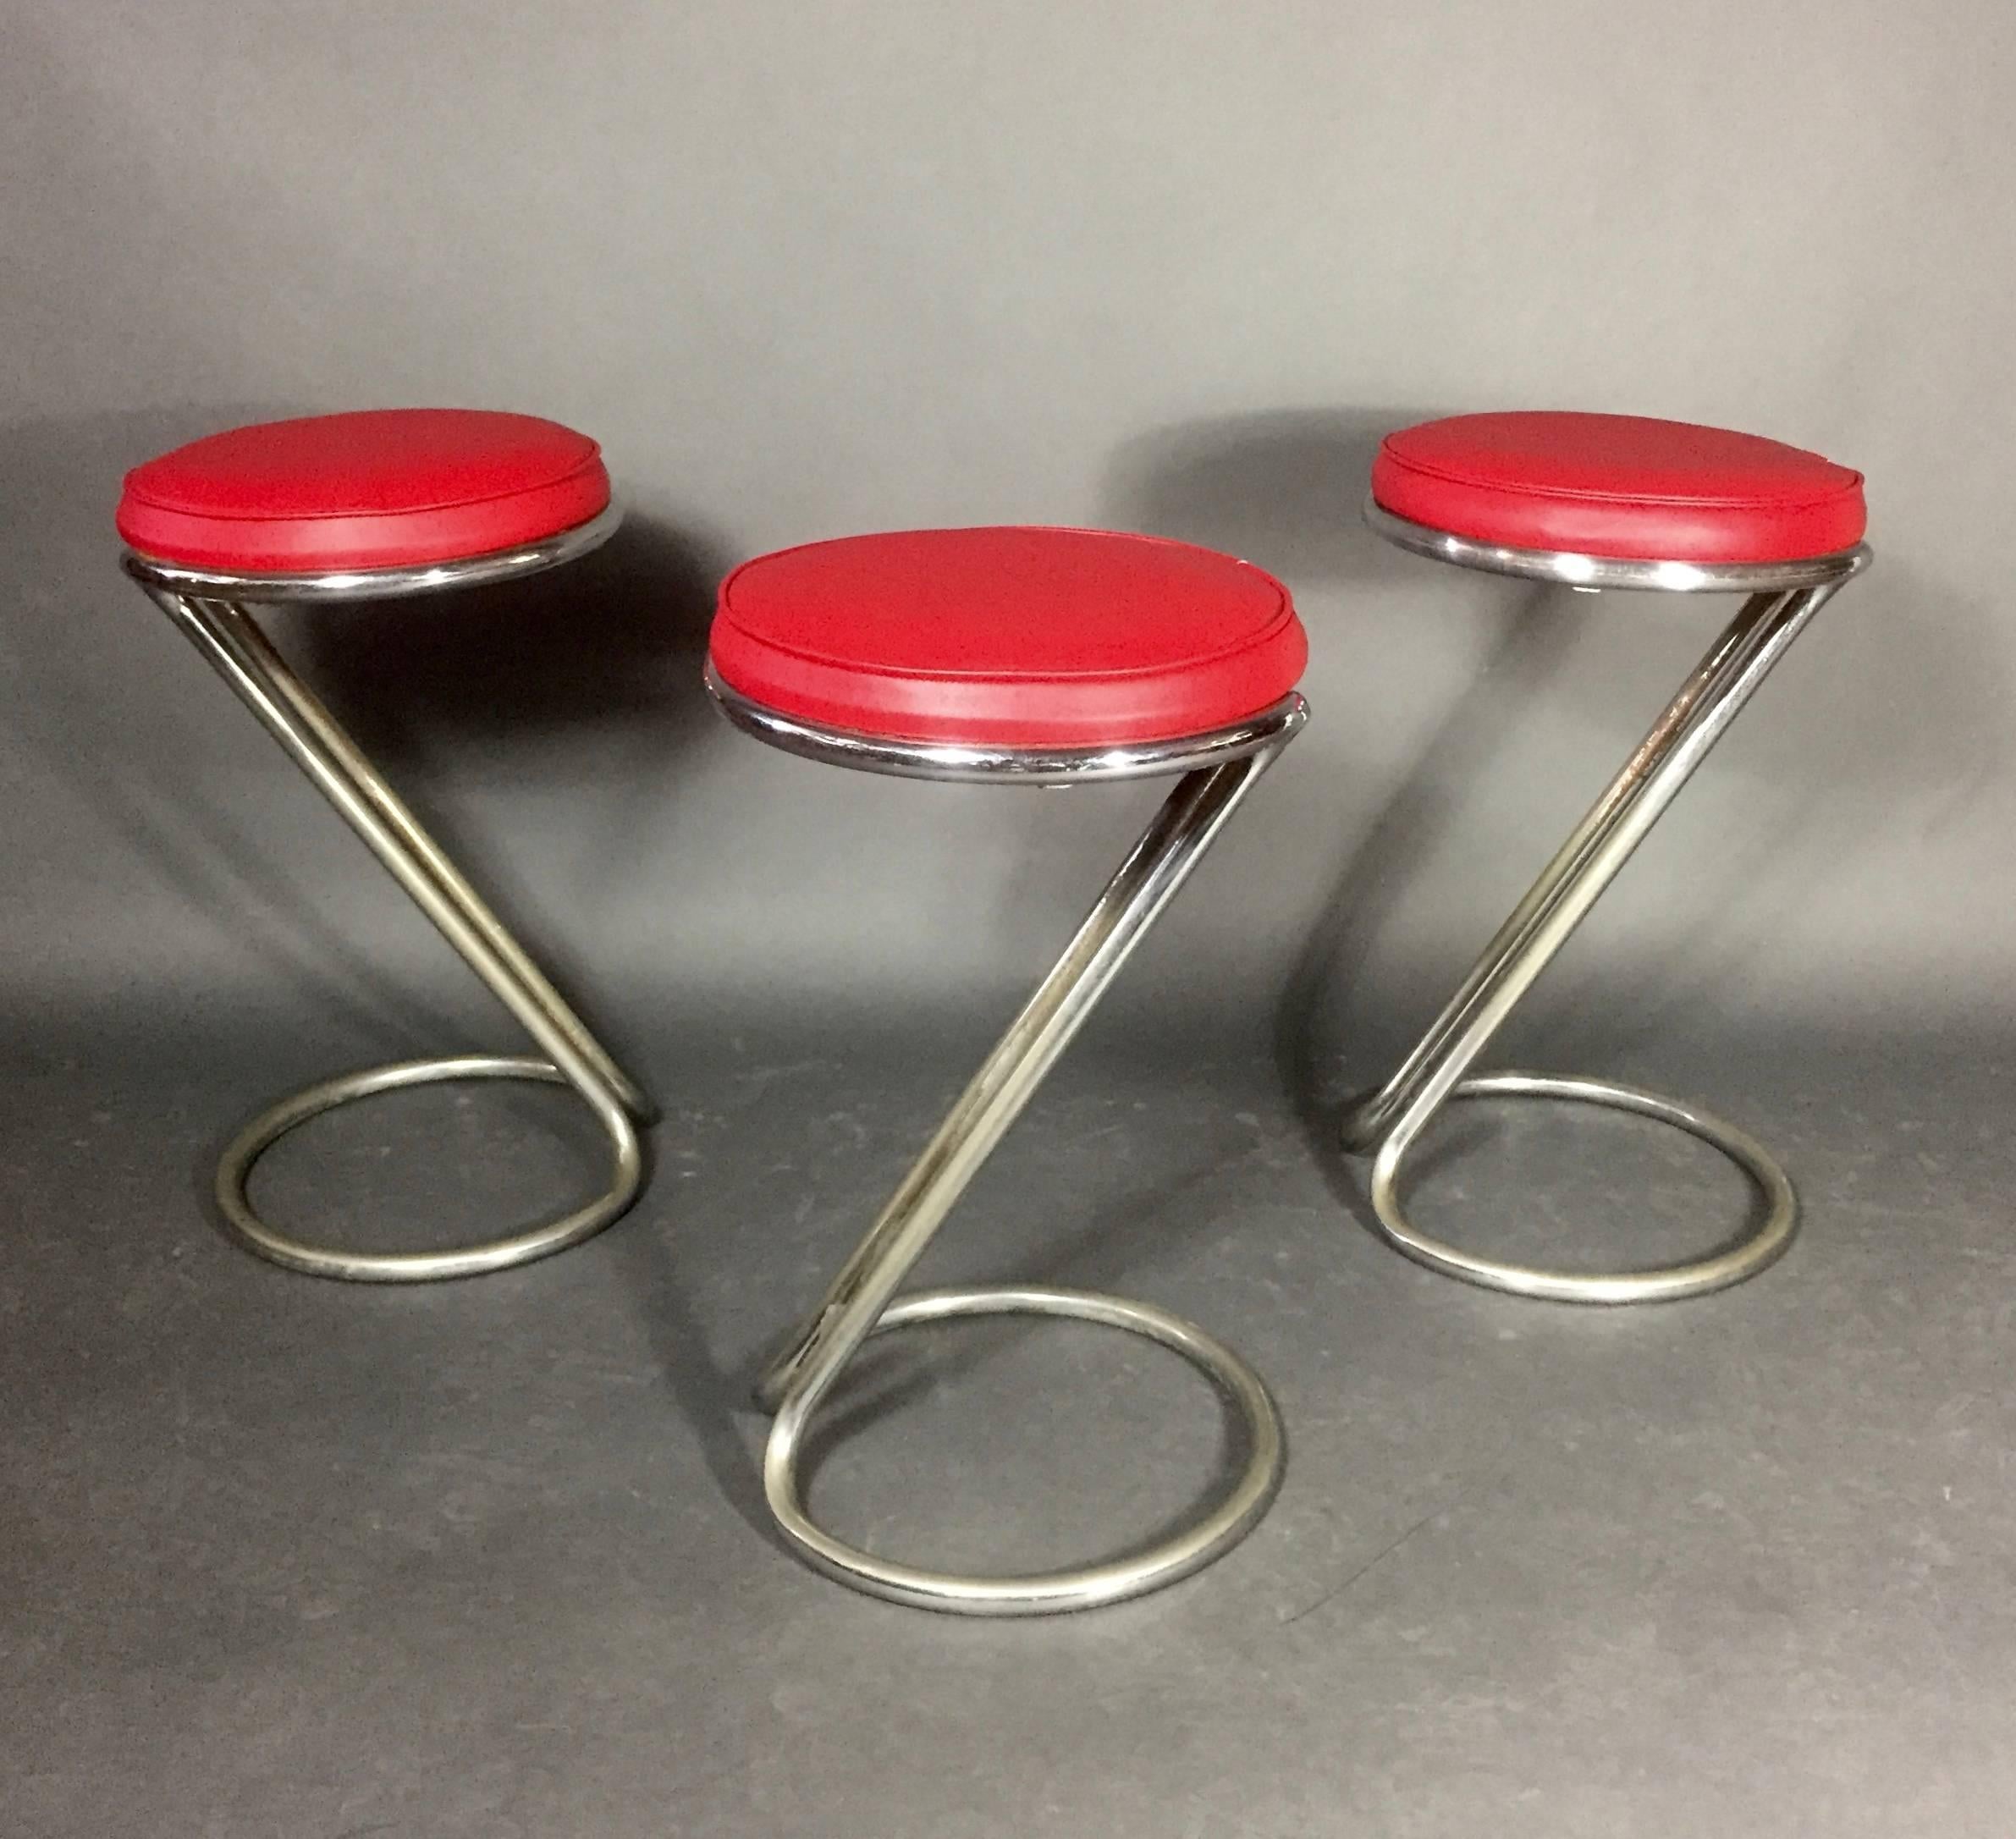 Chic and modern set of three vintage Z-stools by Gilbert Rohde - classic angled chrome-plated steel base with new vinyl seating, for Troy Sunshade, USA, 1930s. Some loss to chrome plating overall.  ONLY TWO REMAINING>